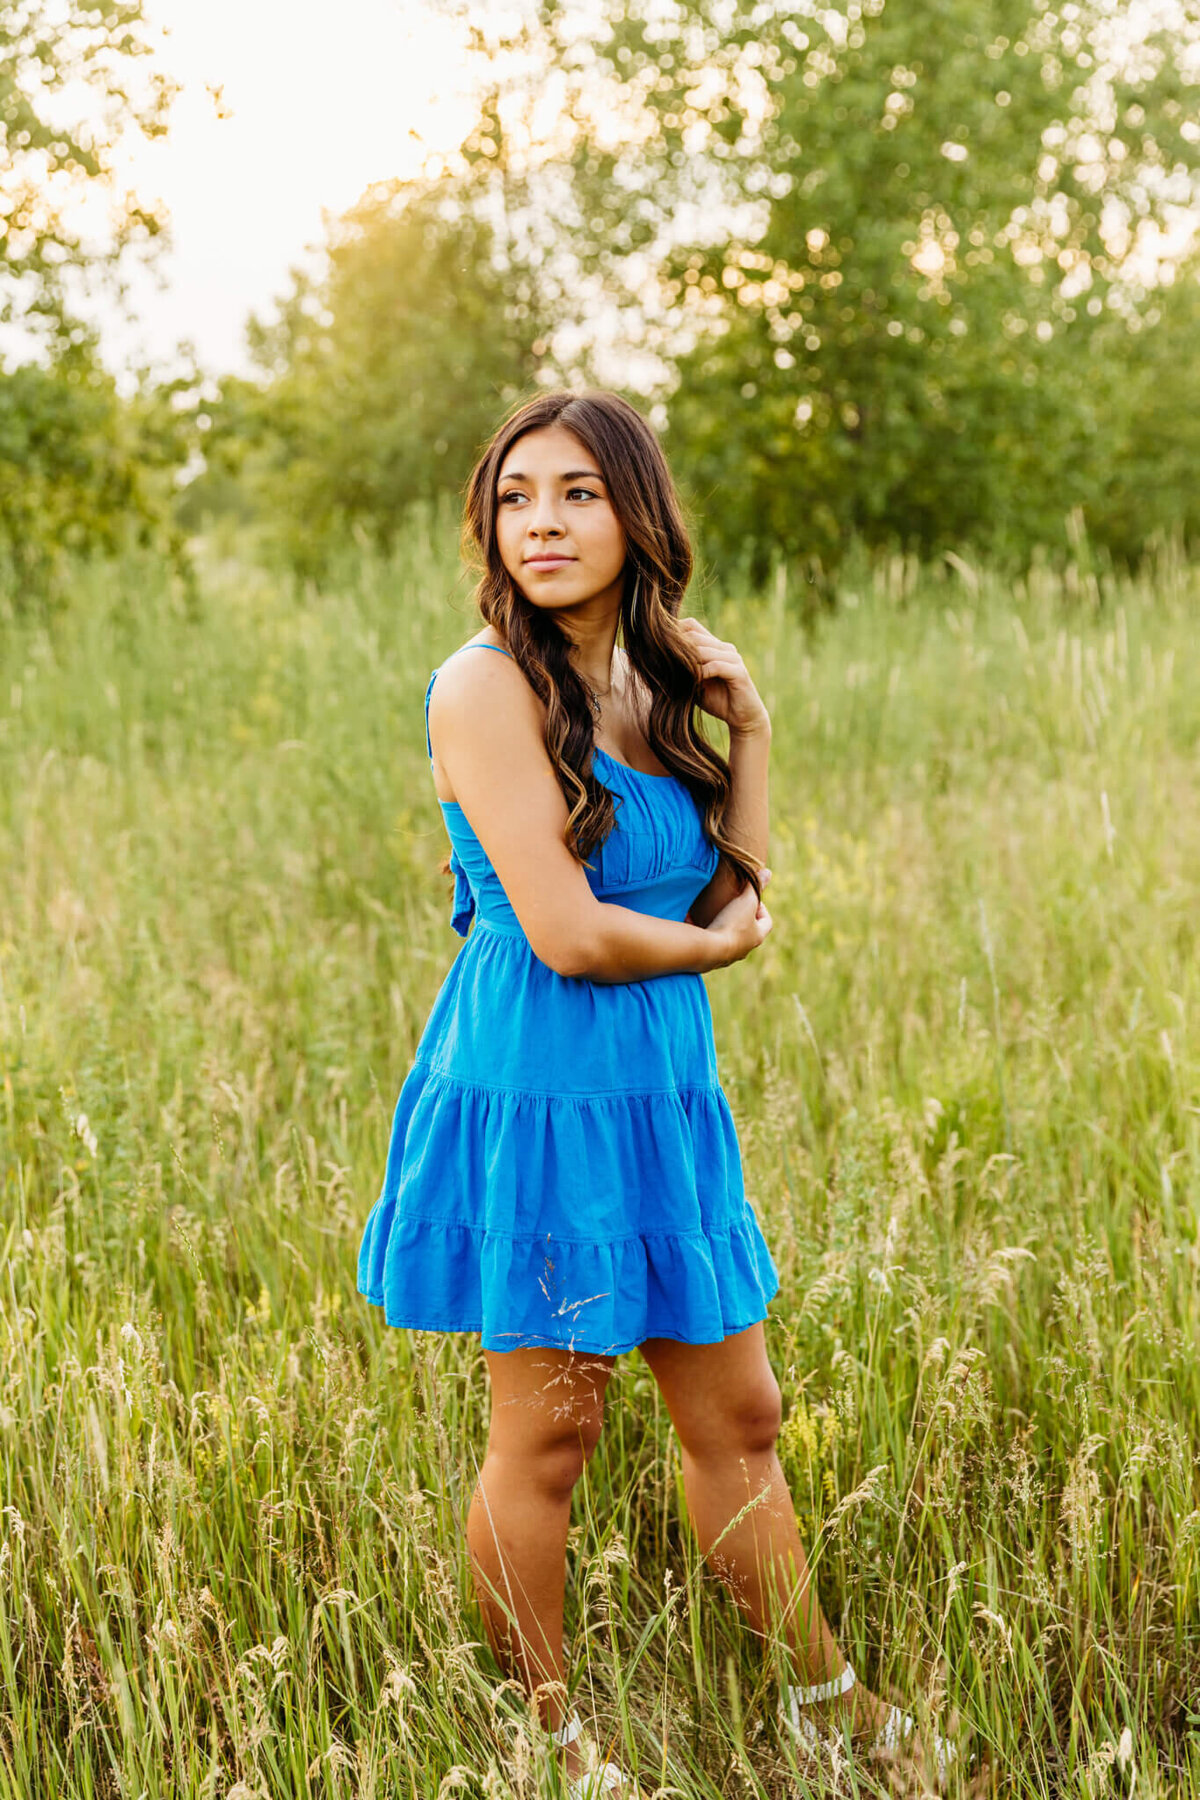 beautiful image of a high school senior looking back over her shoulder as she stands in a green field and plays with her hair